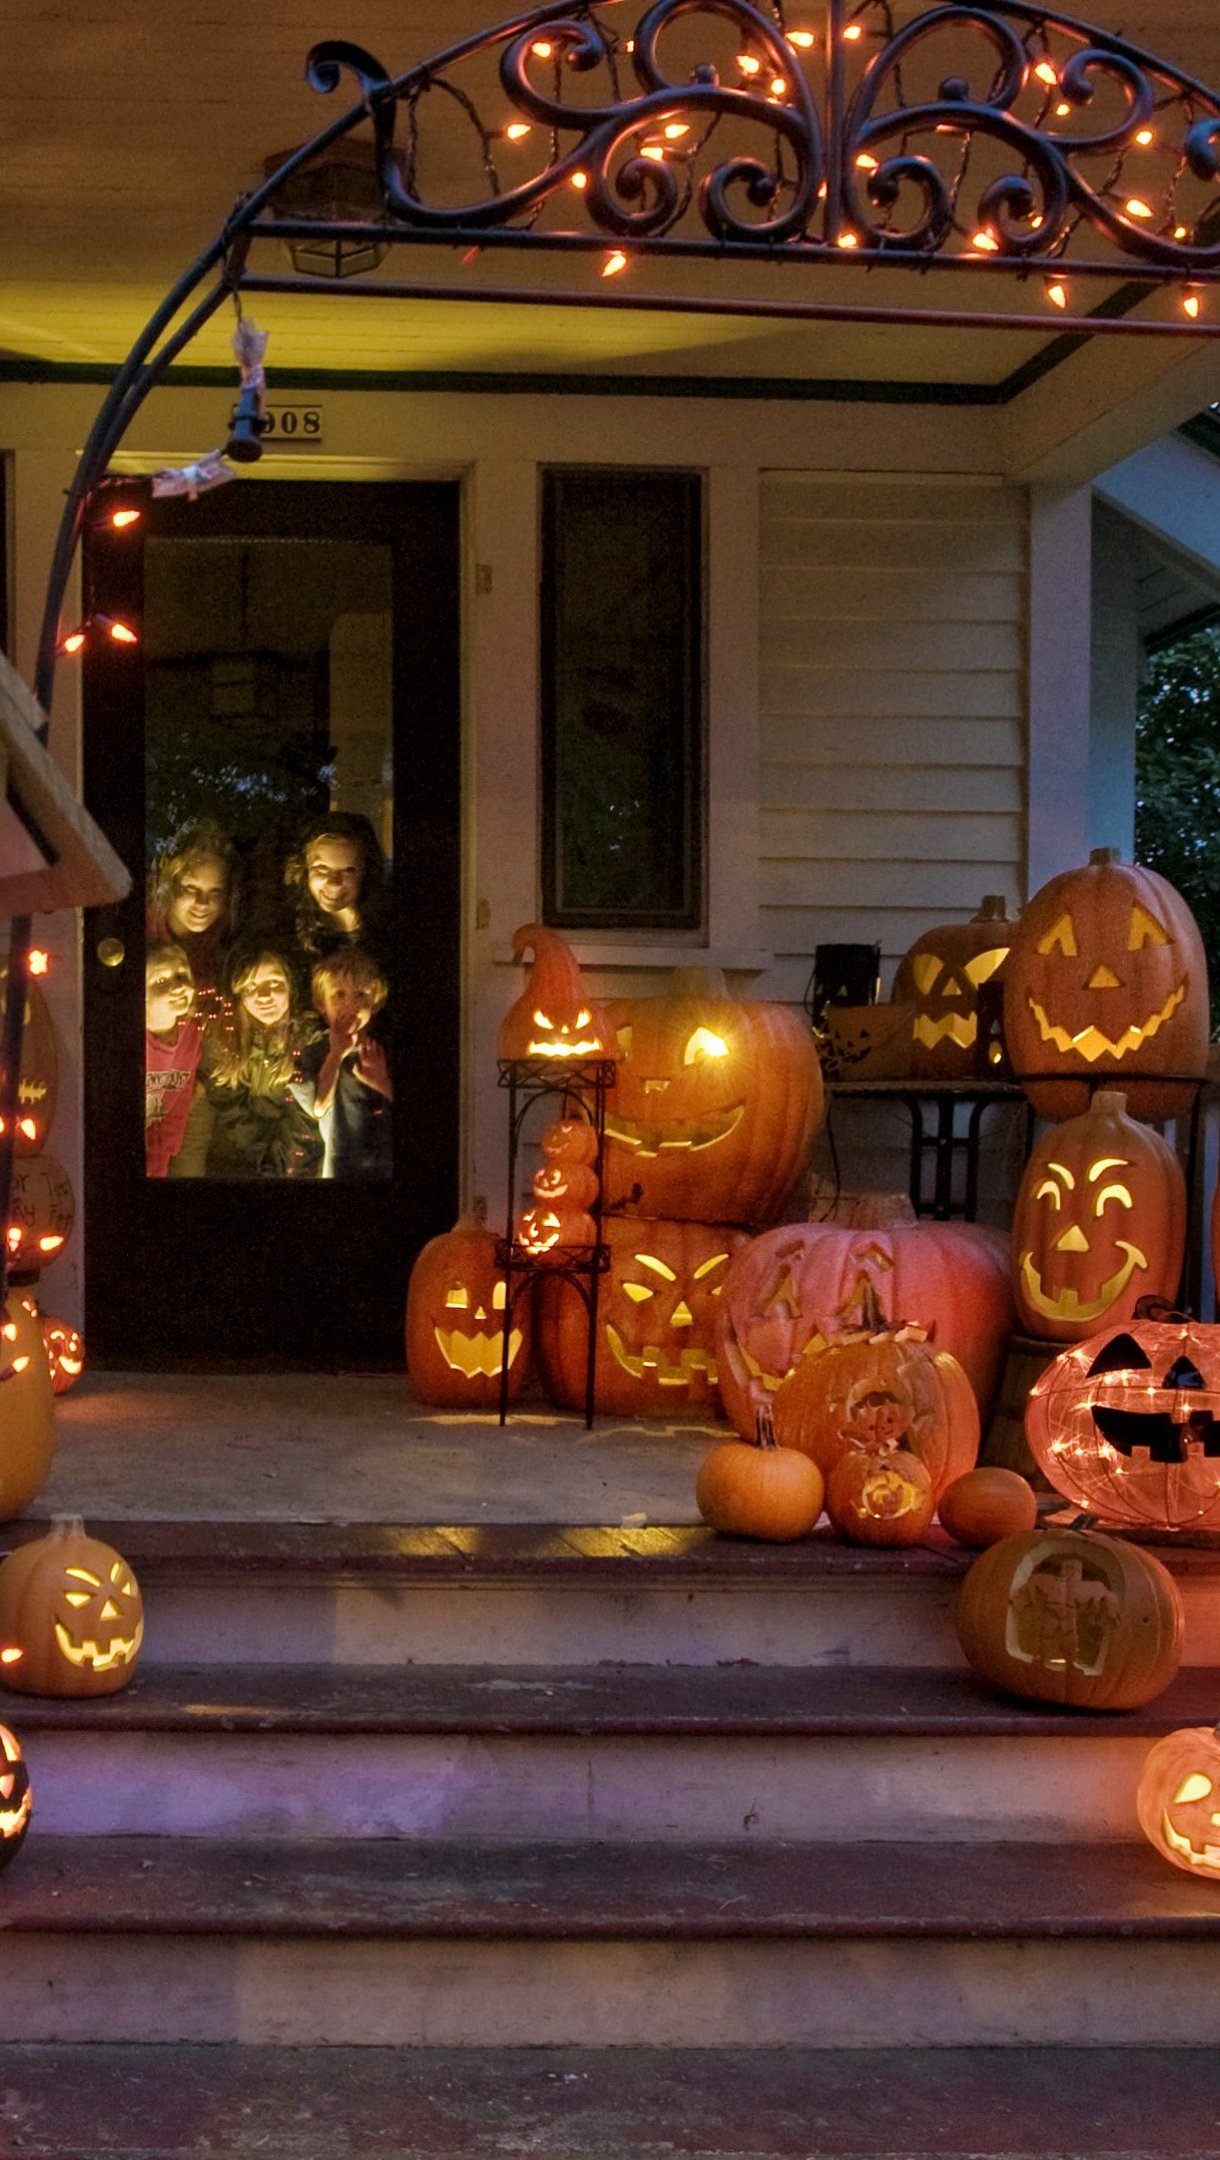 House decorated for halloween Wallpaper 4k Ultra HD